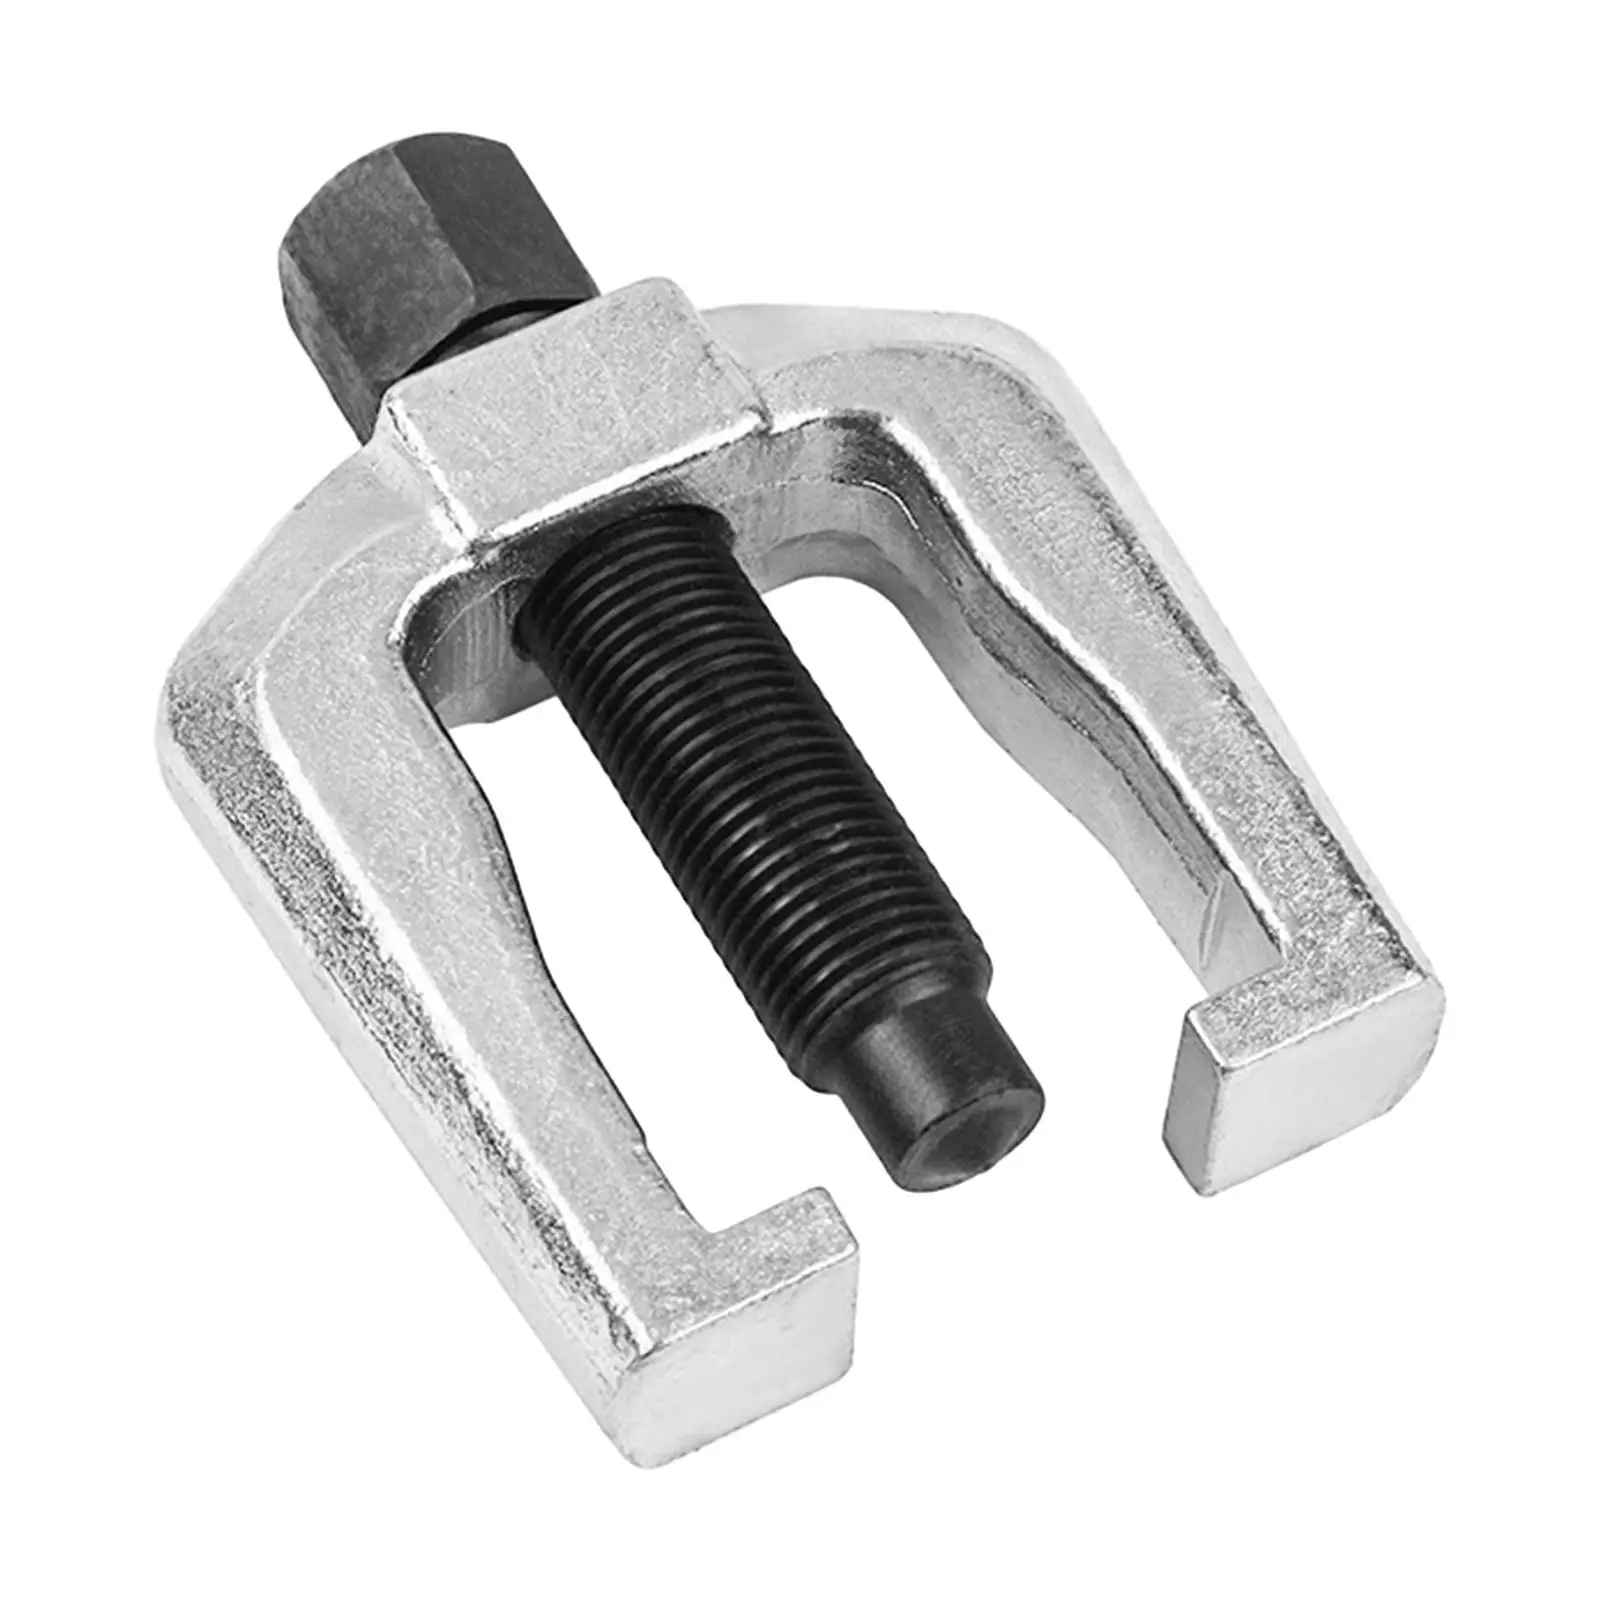 Slack Adjuster Puller Compact Durable Metal Trucks Heavy Duty Professional Repair Tool Works on Automatic Adjusters Remover Tool